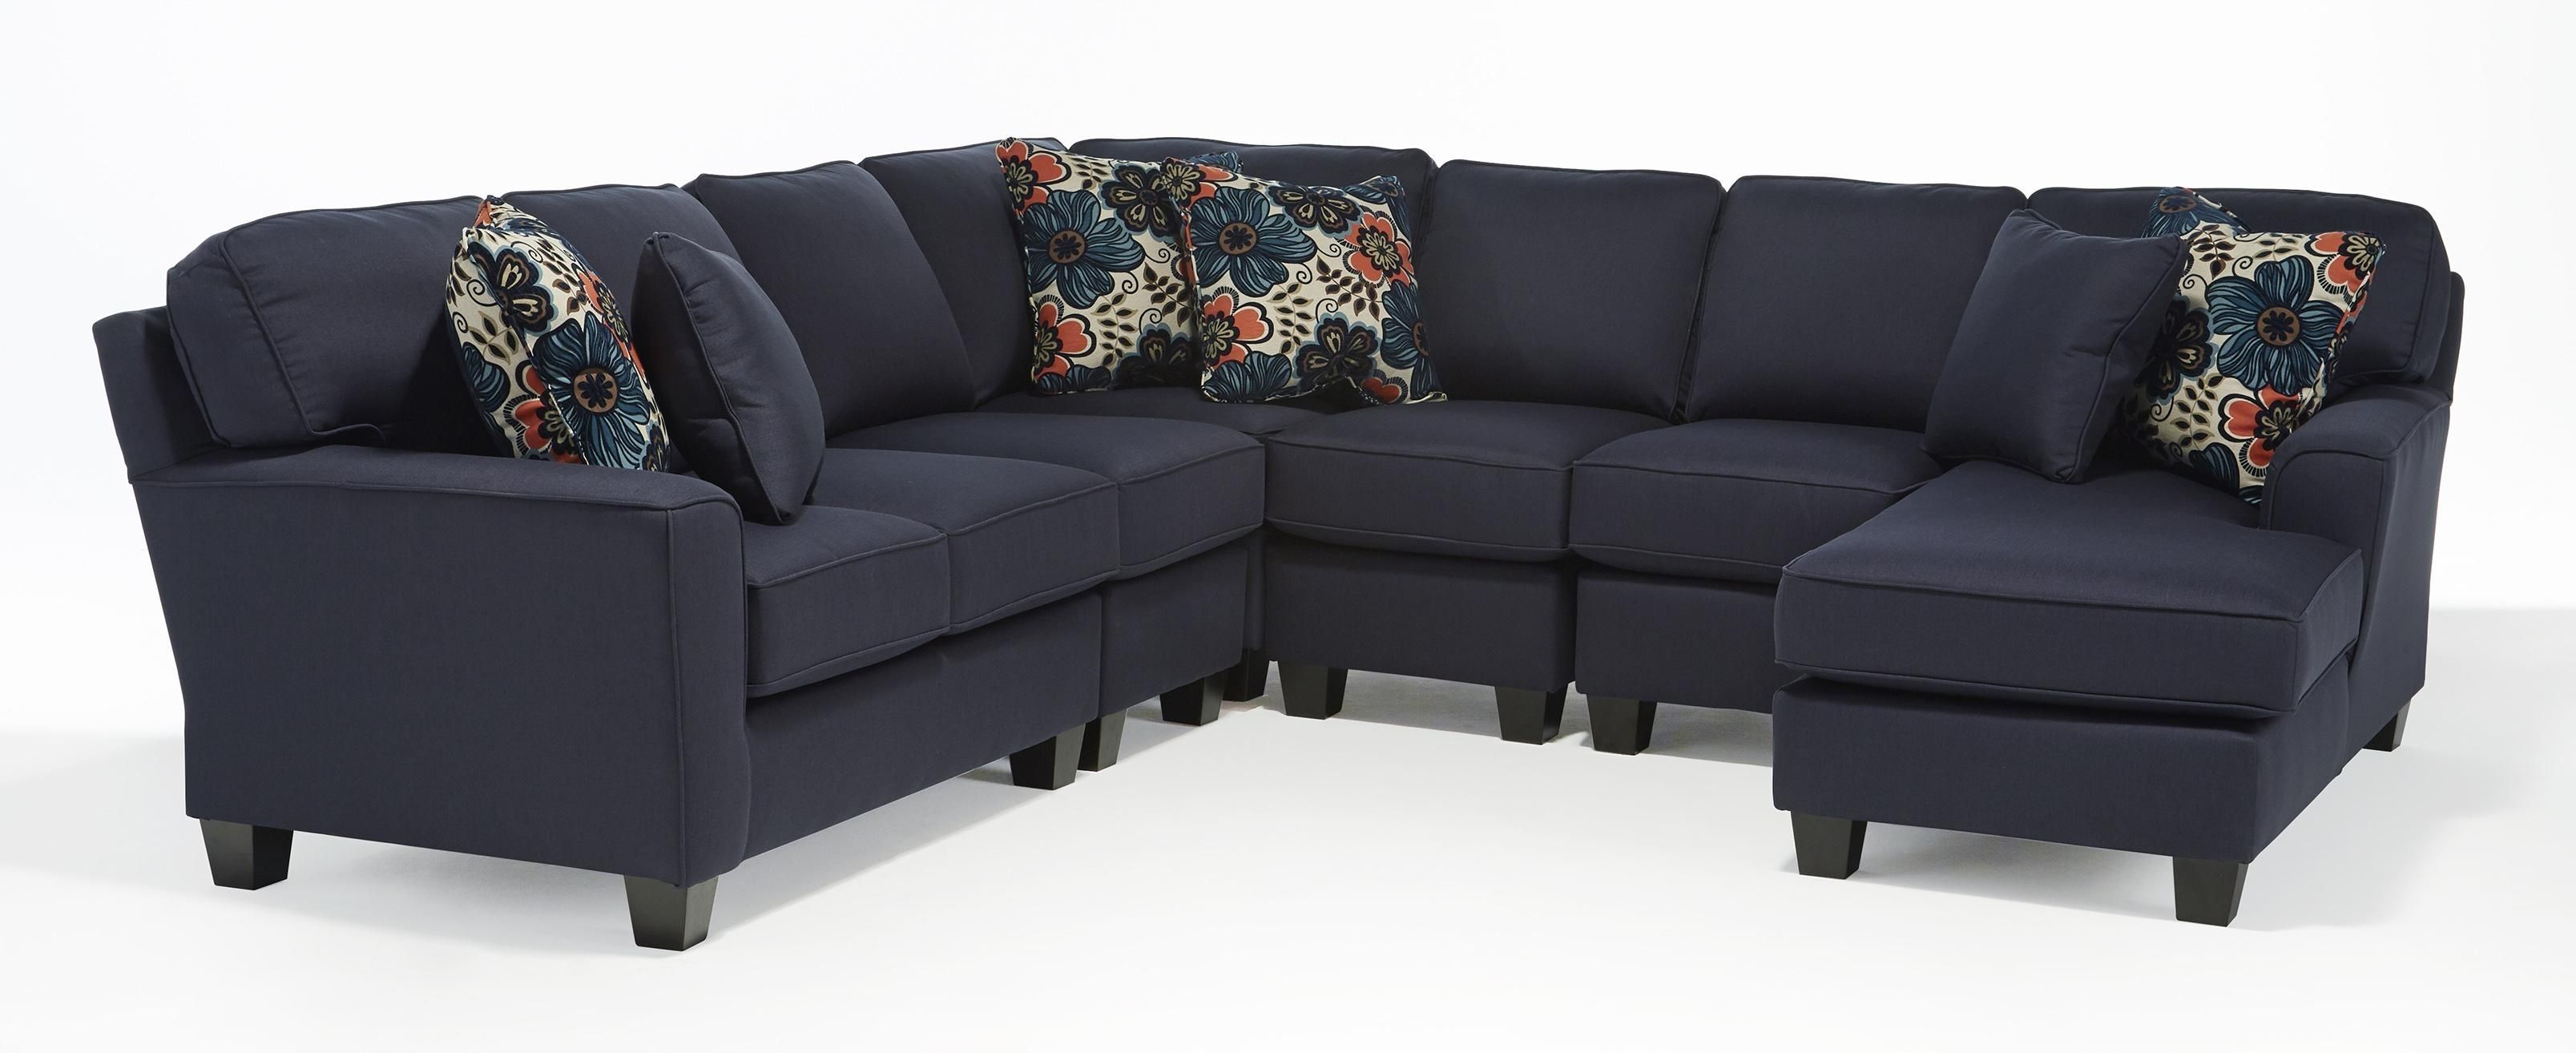 Best Home Furnishings Annabel Five Piece Customizable Sectional Sofa Regarding Home Furniture Sectional Sofas (View 5 of 10)